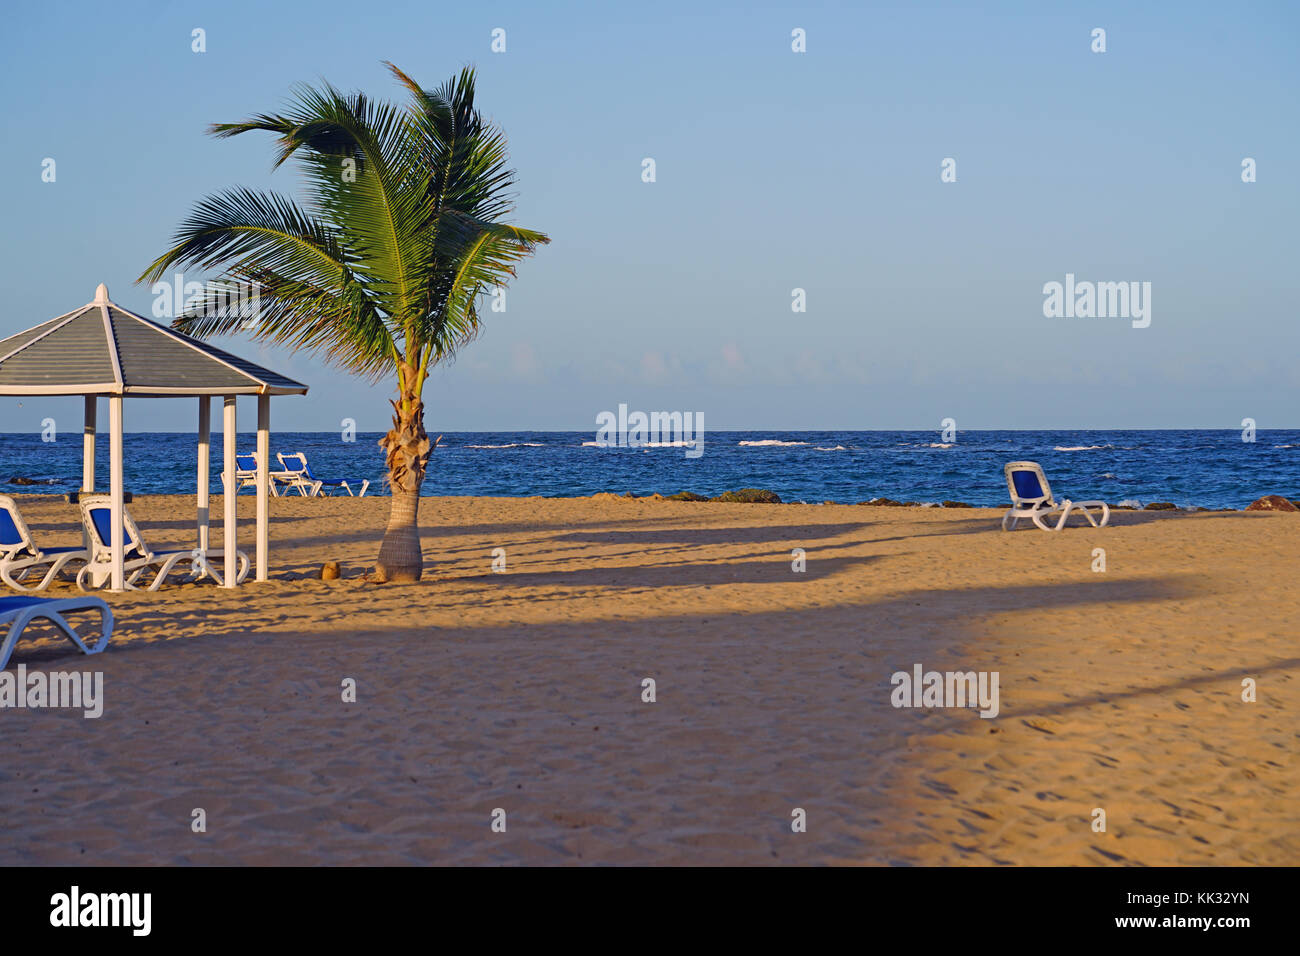 ST KITTS, ST KITTS AND NEVIS - View of the St Kitts Marriott Resort and the Royal Beach Casino in Frigate Bay, Saint Kitts. Stock Photo